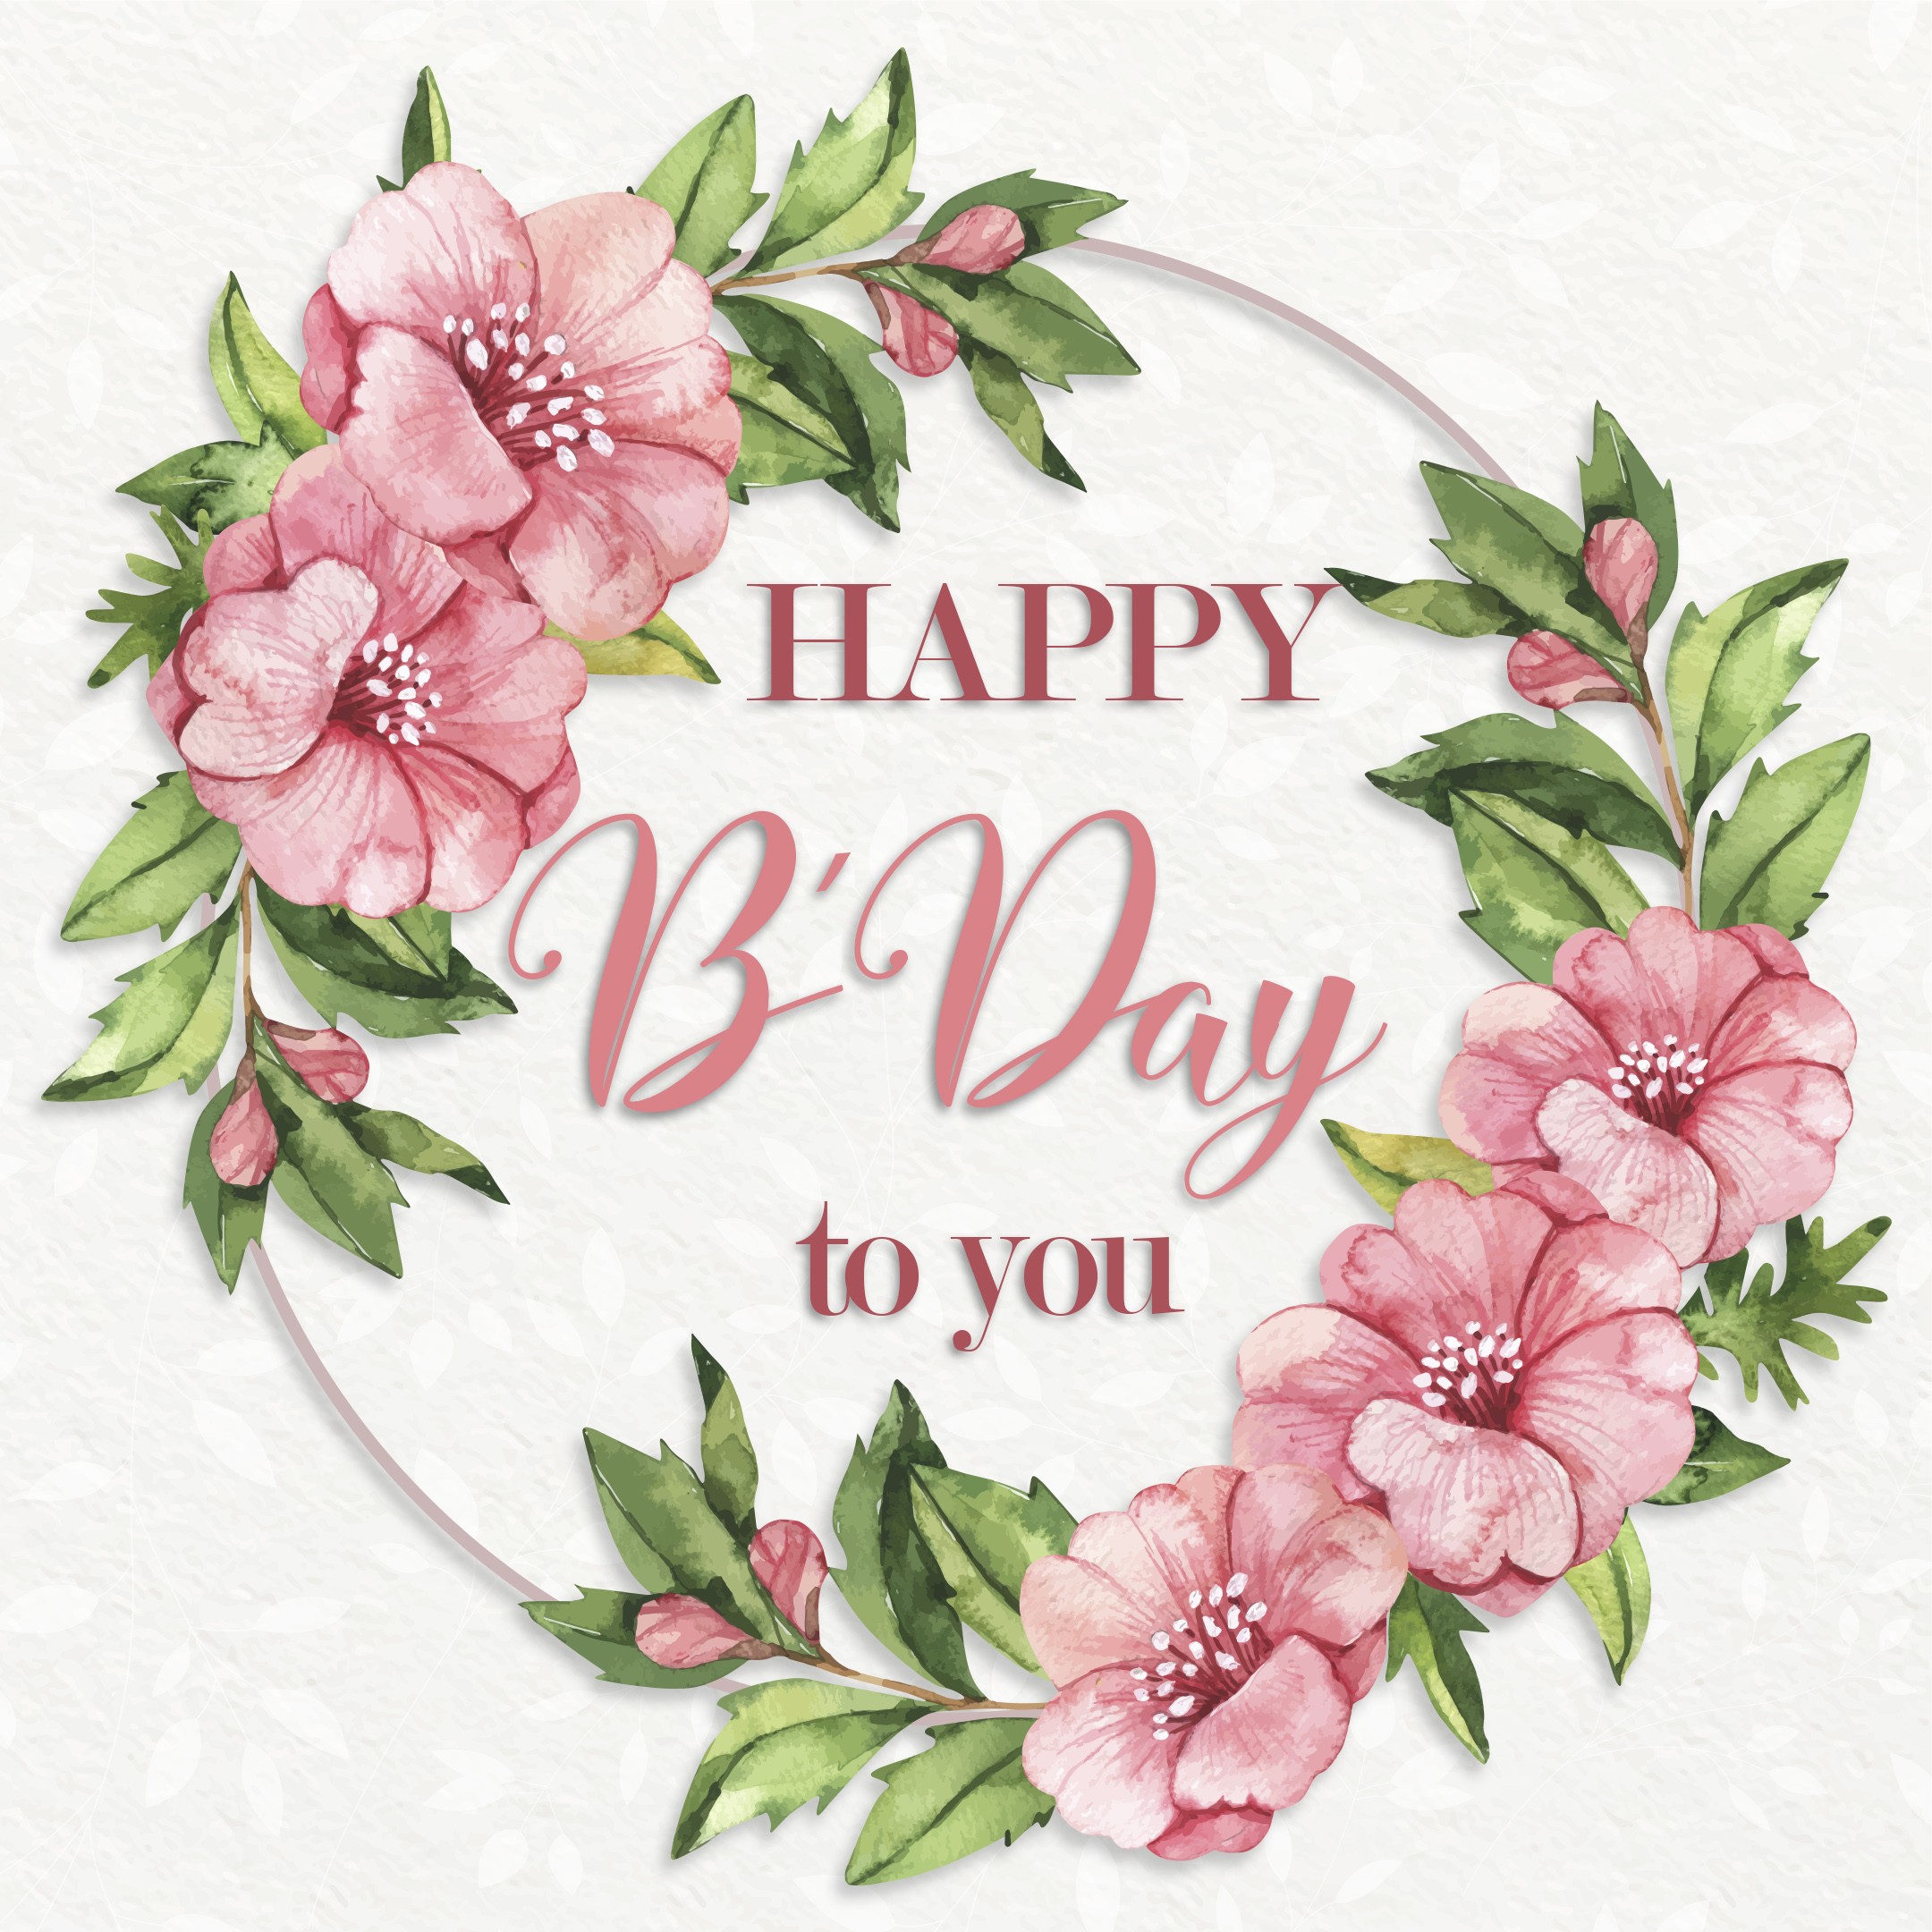 Free Happy Birthday Image For Girl With Flowers - birthdayimg.com